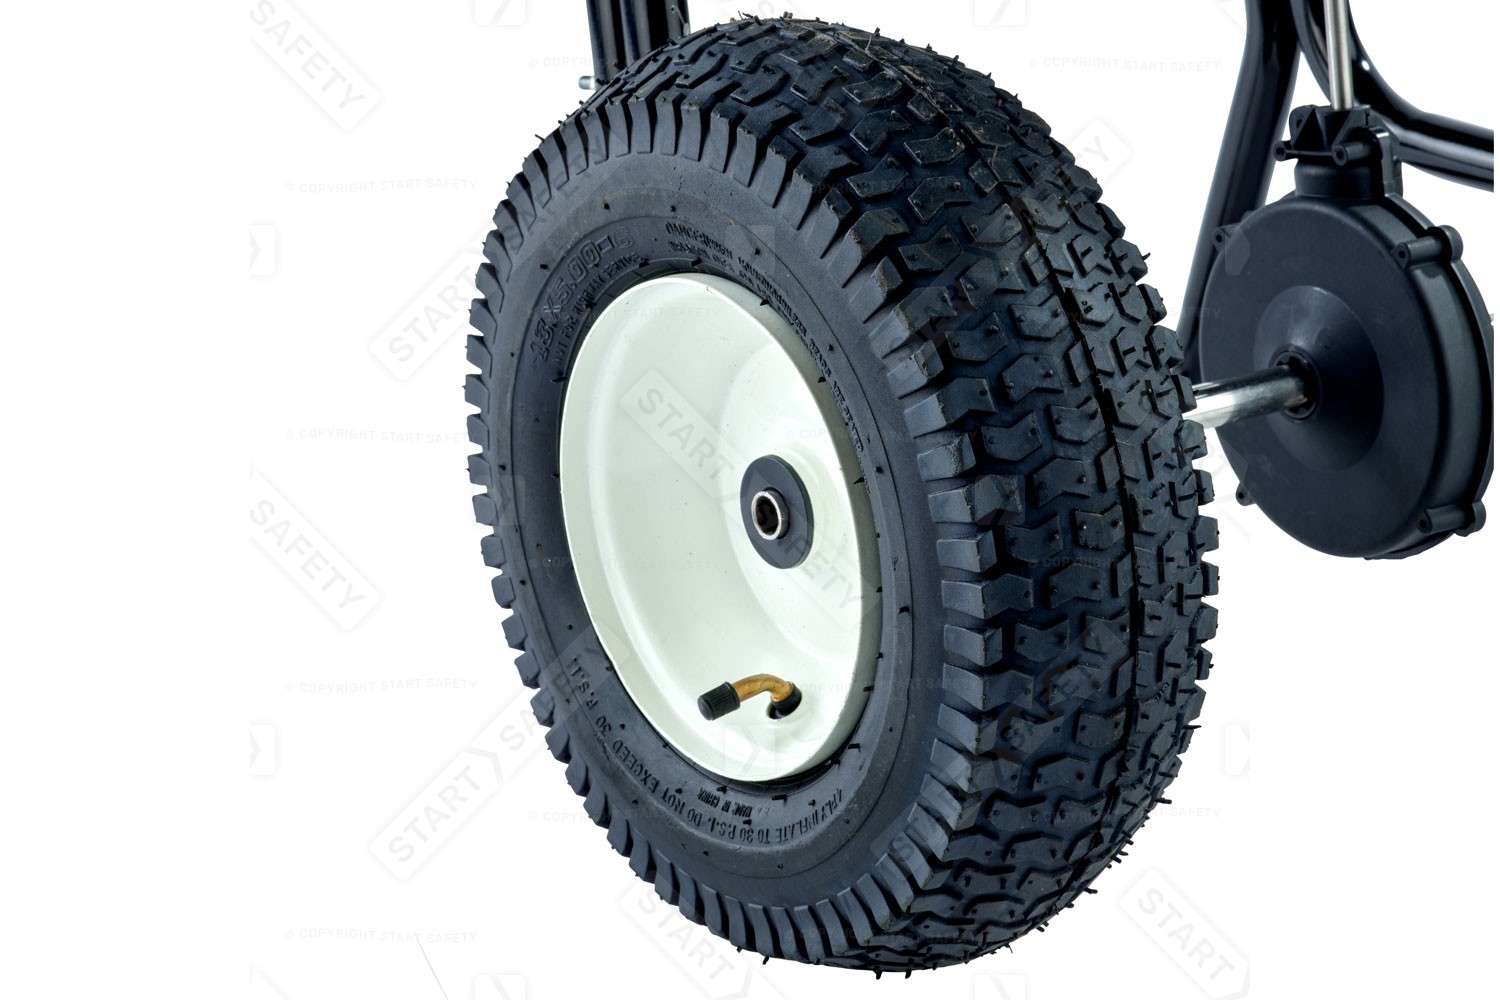 Salt Spreader With Air-Filled Tire